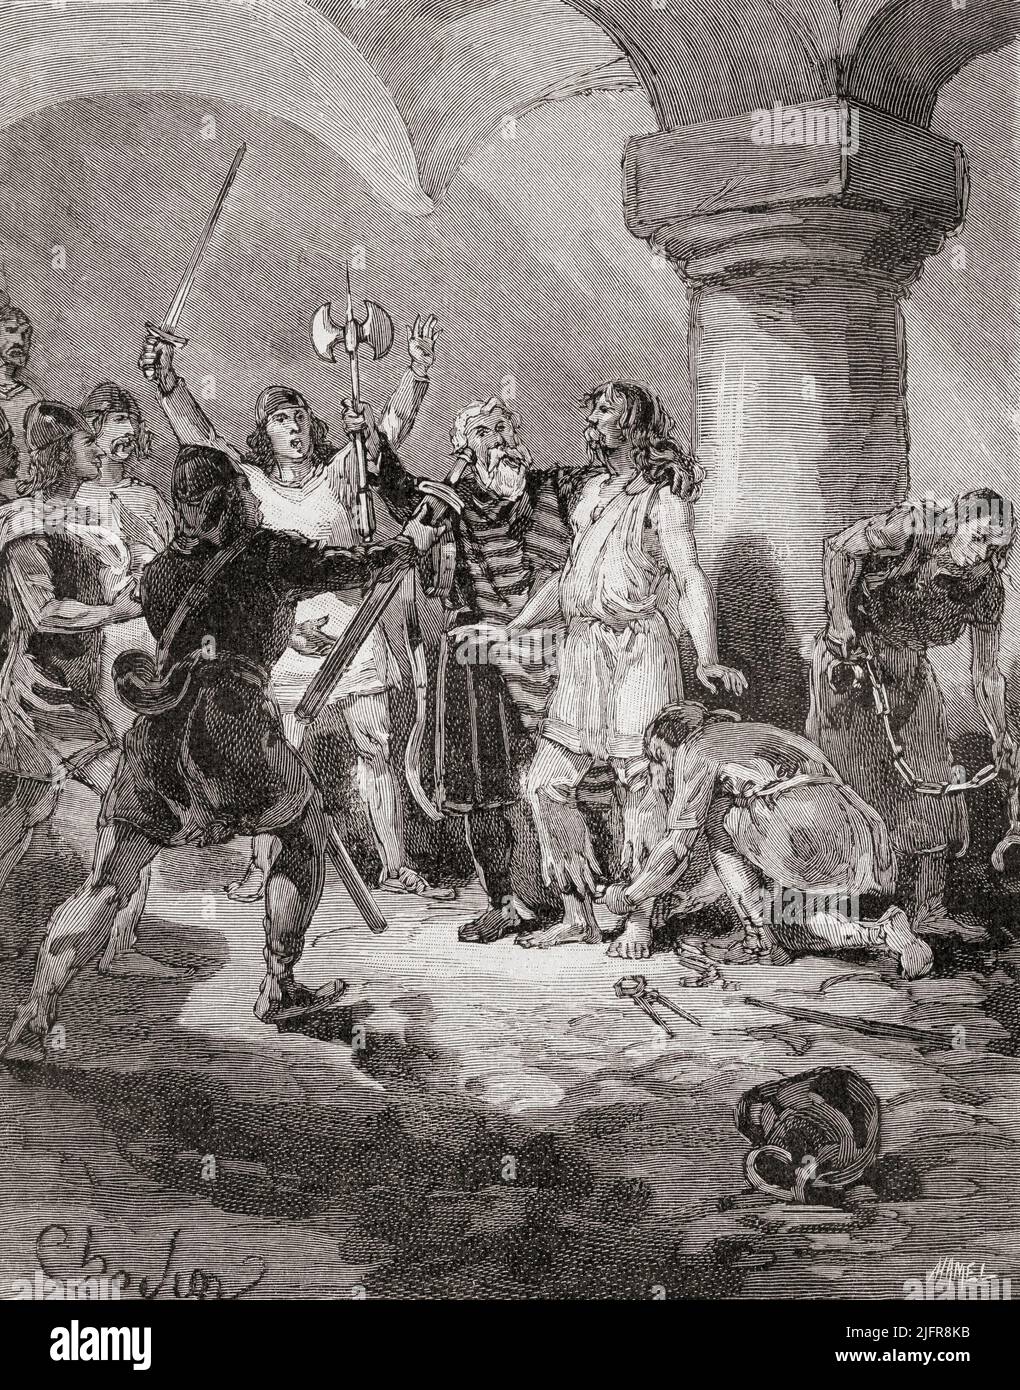 Charles Martel imprisoned on the orders of Plectrude to prevent an uprising on his behalf in Austrasia. Charles Martel, c. 688 –741, illegitimate son of Pepin of Herstal.  Frankish political and military leader who, as Duke and Prince of the Franks and Mayor of the Palace, was the de facto ruler of Francia.  From Histoire de France, published 1855. Stock Photo